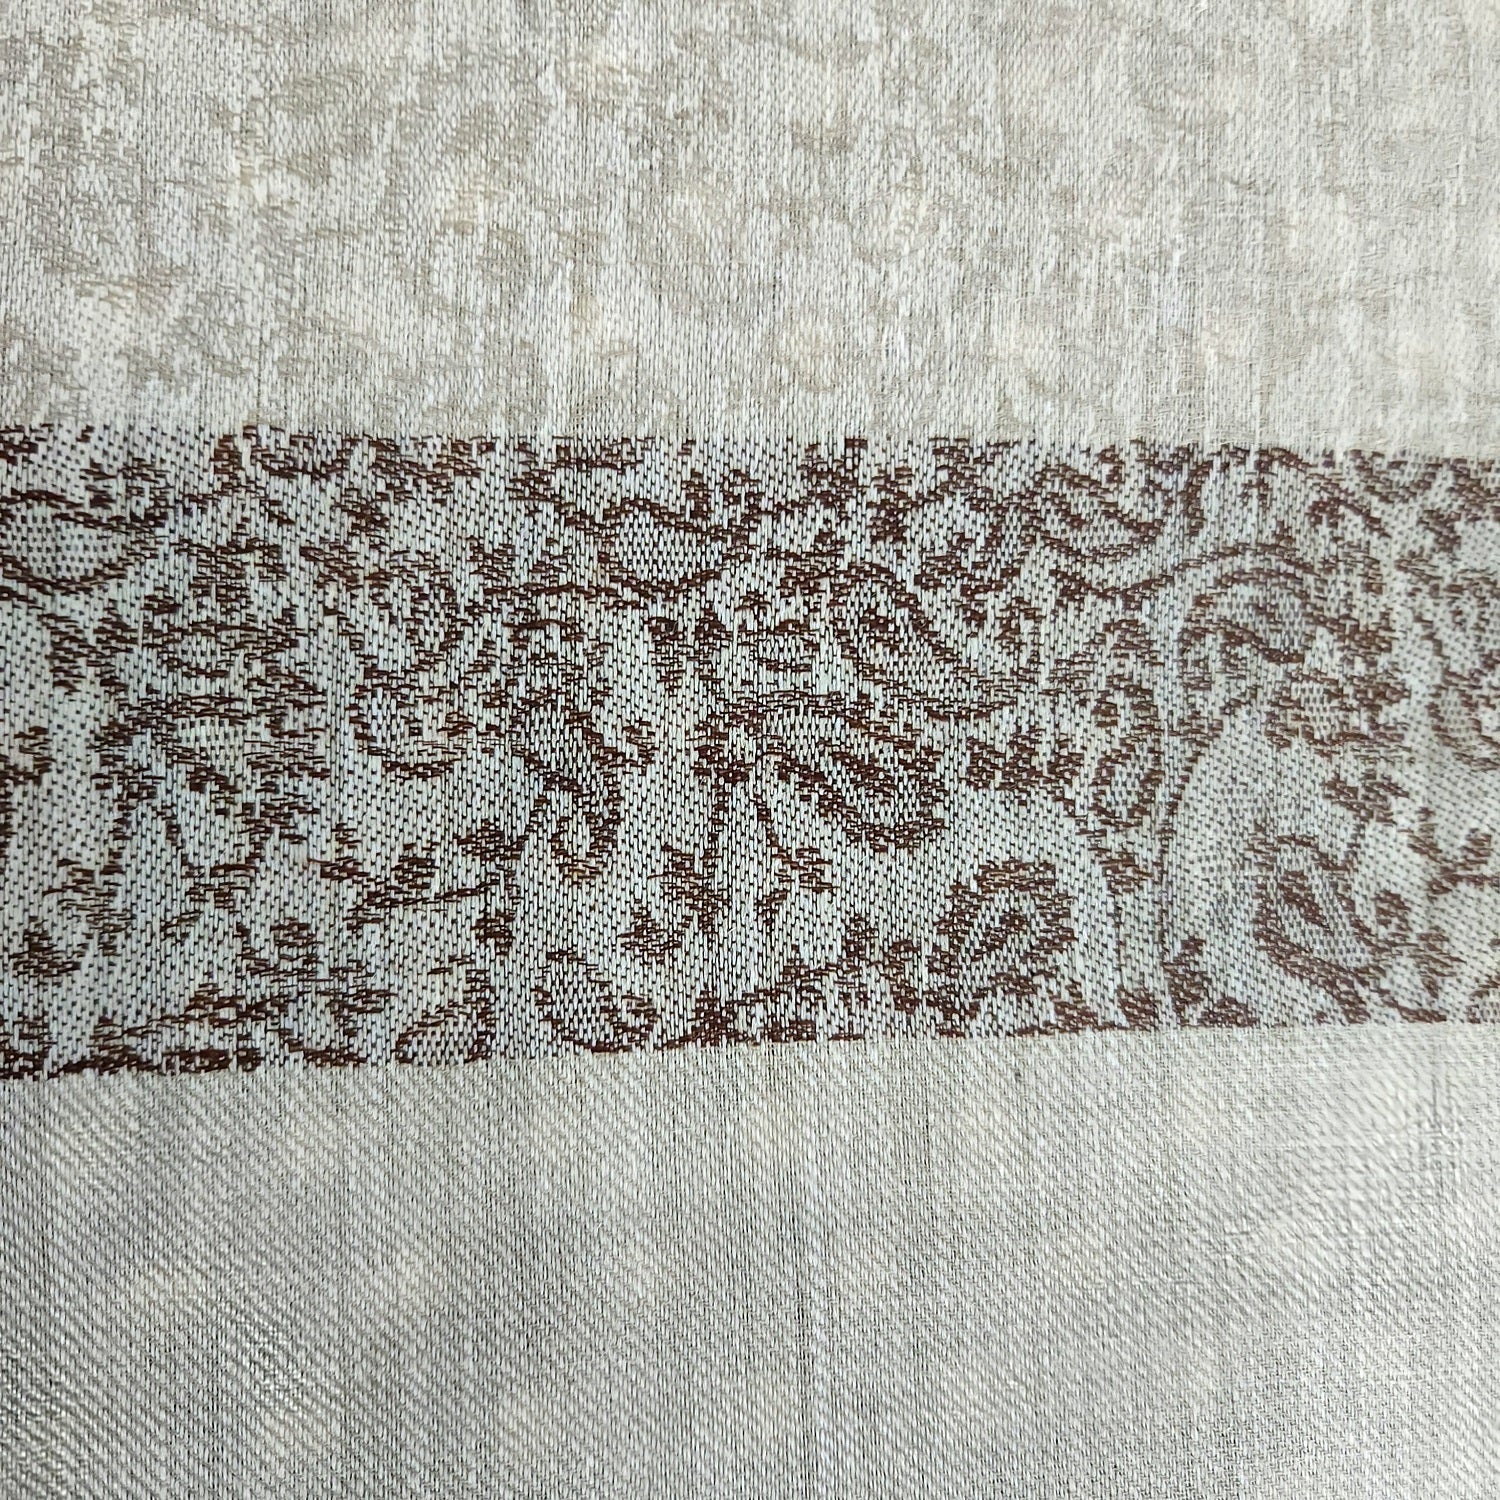 pure-wool-pashmina-shawl-light-brown-with-floral-design-thread-work-with-brown-border